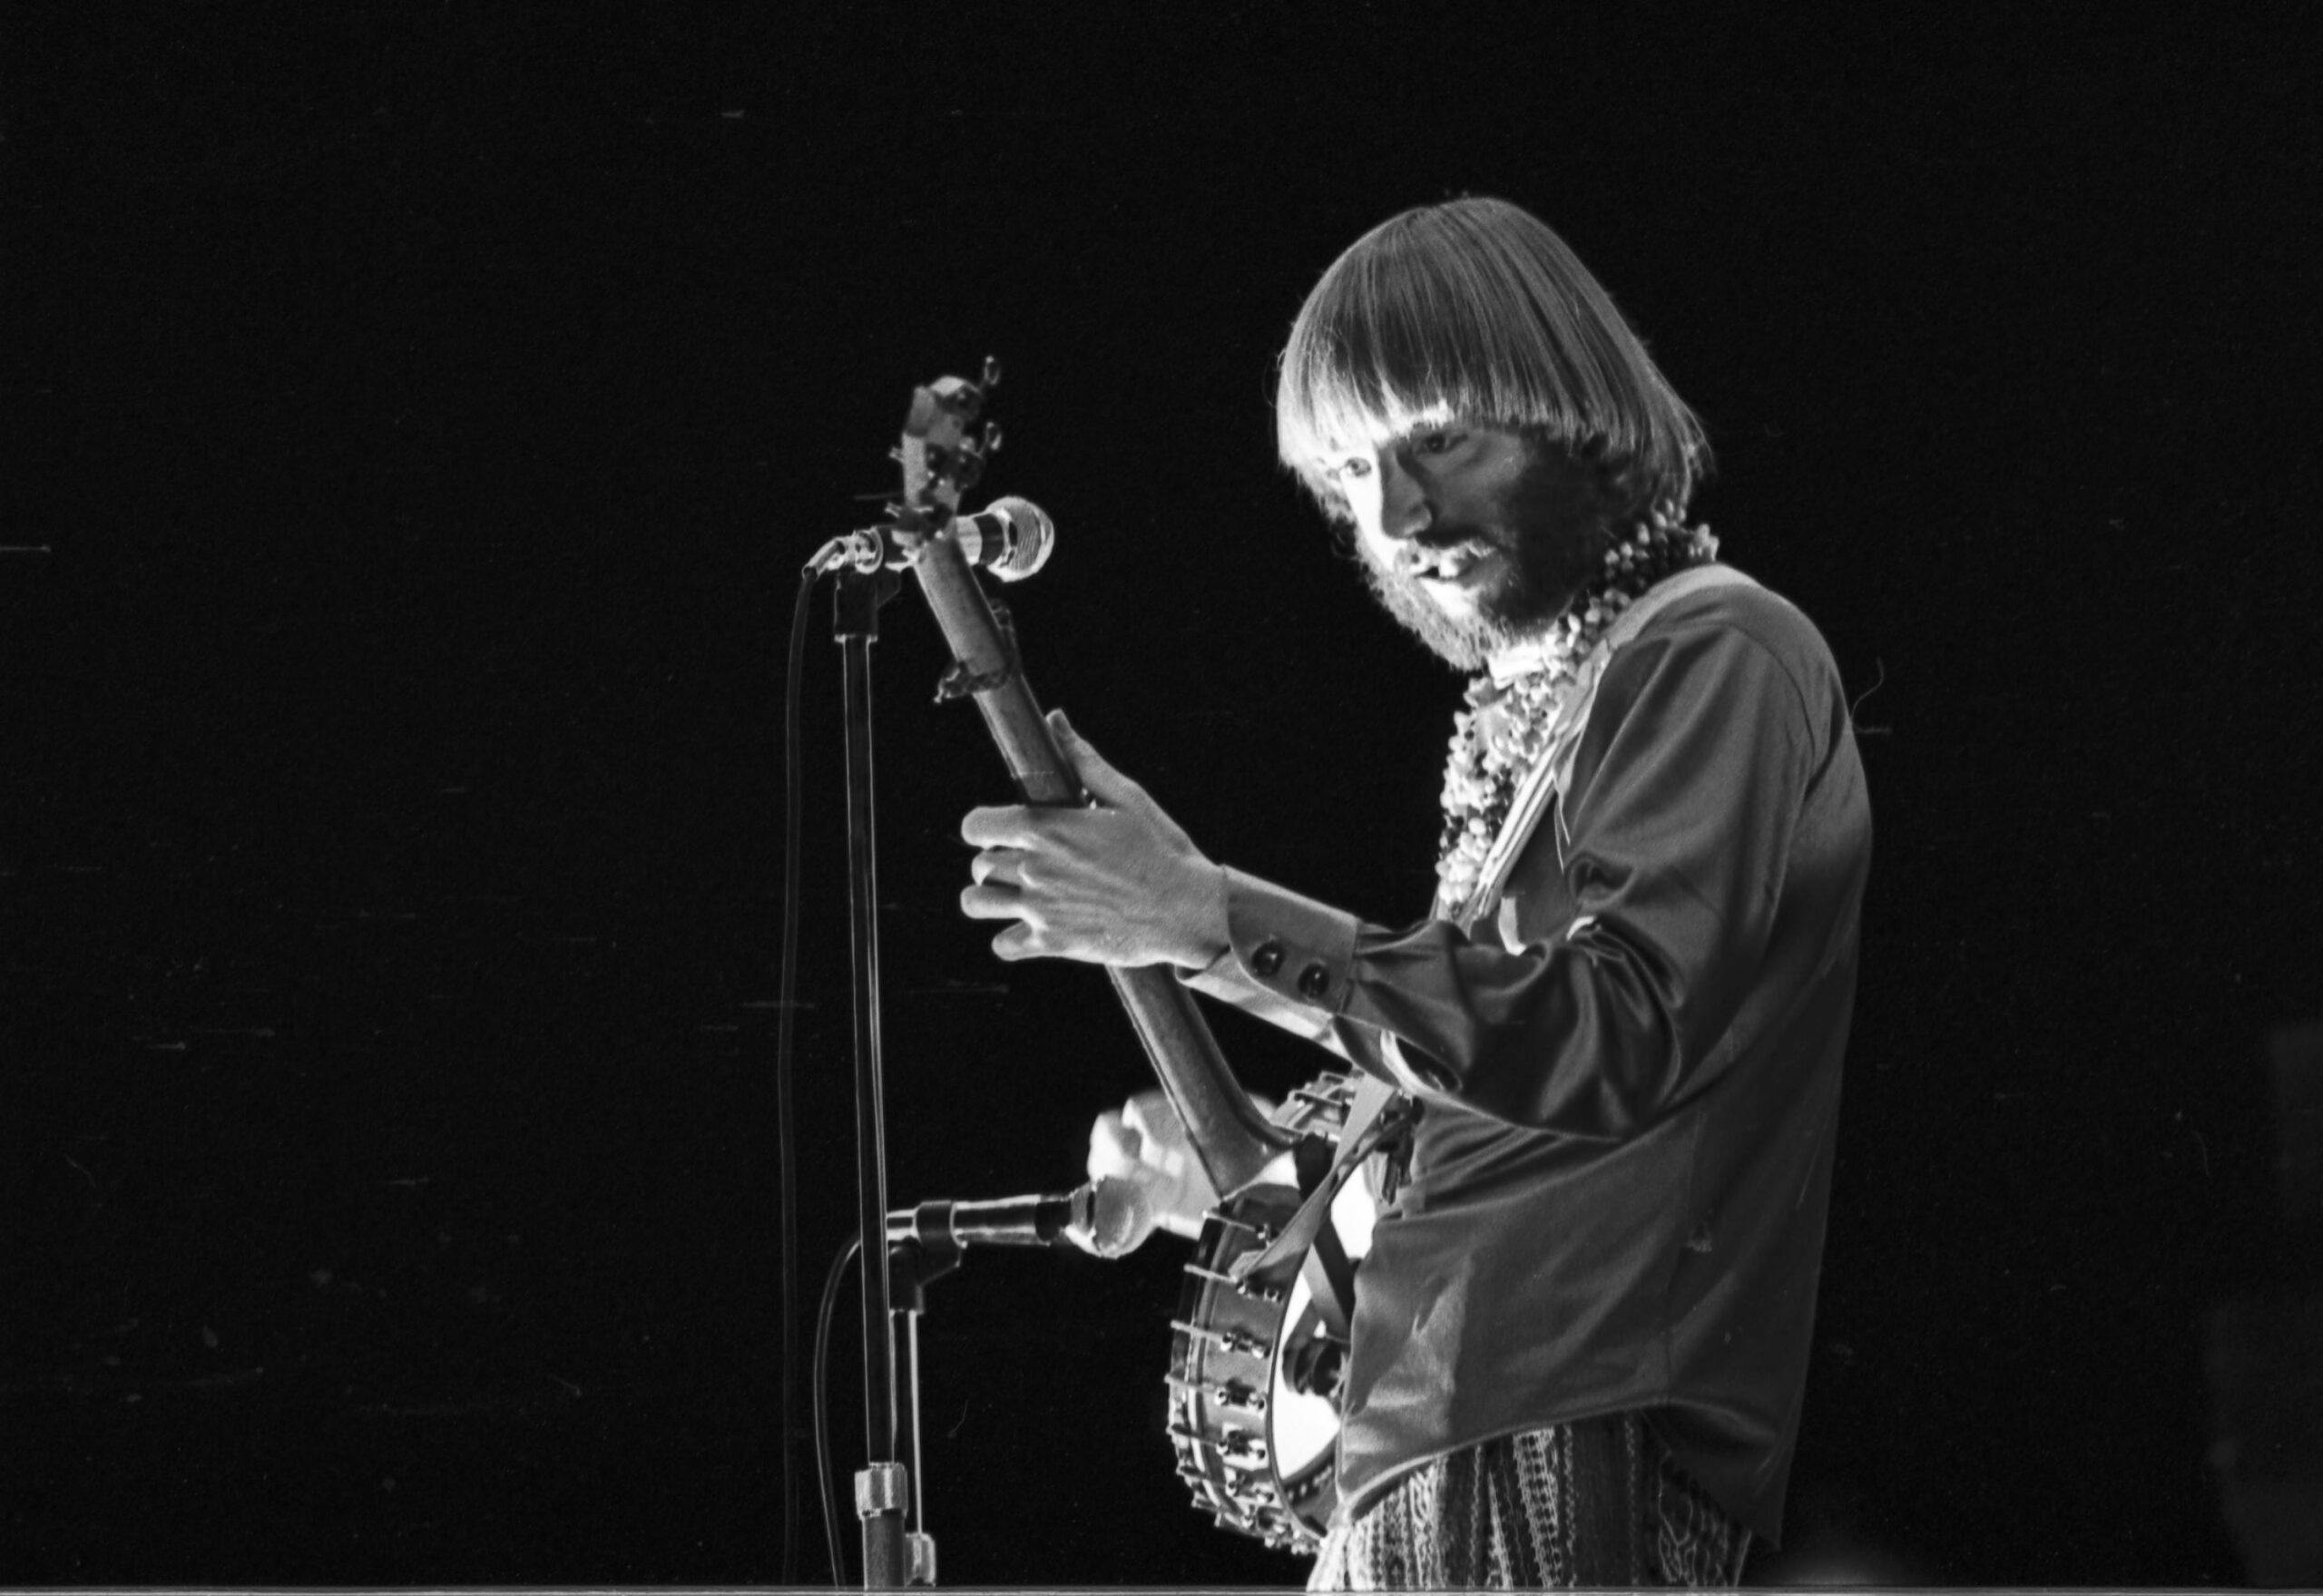 Peter Tork of The Monkees in concert at The Stadium in Sydney on 21 September 19